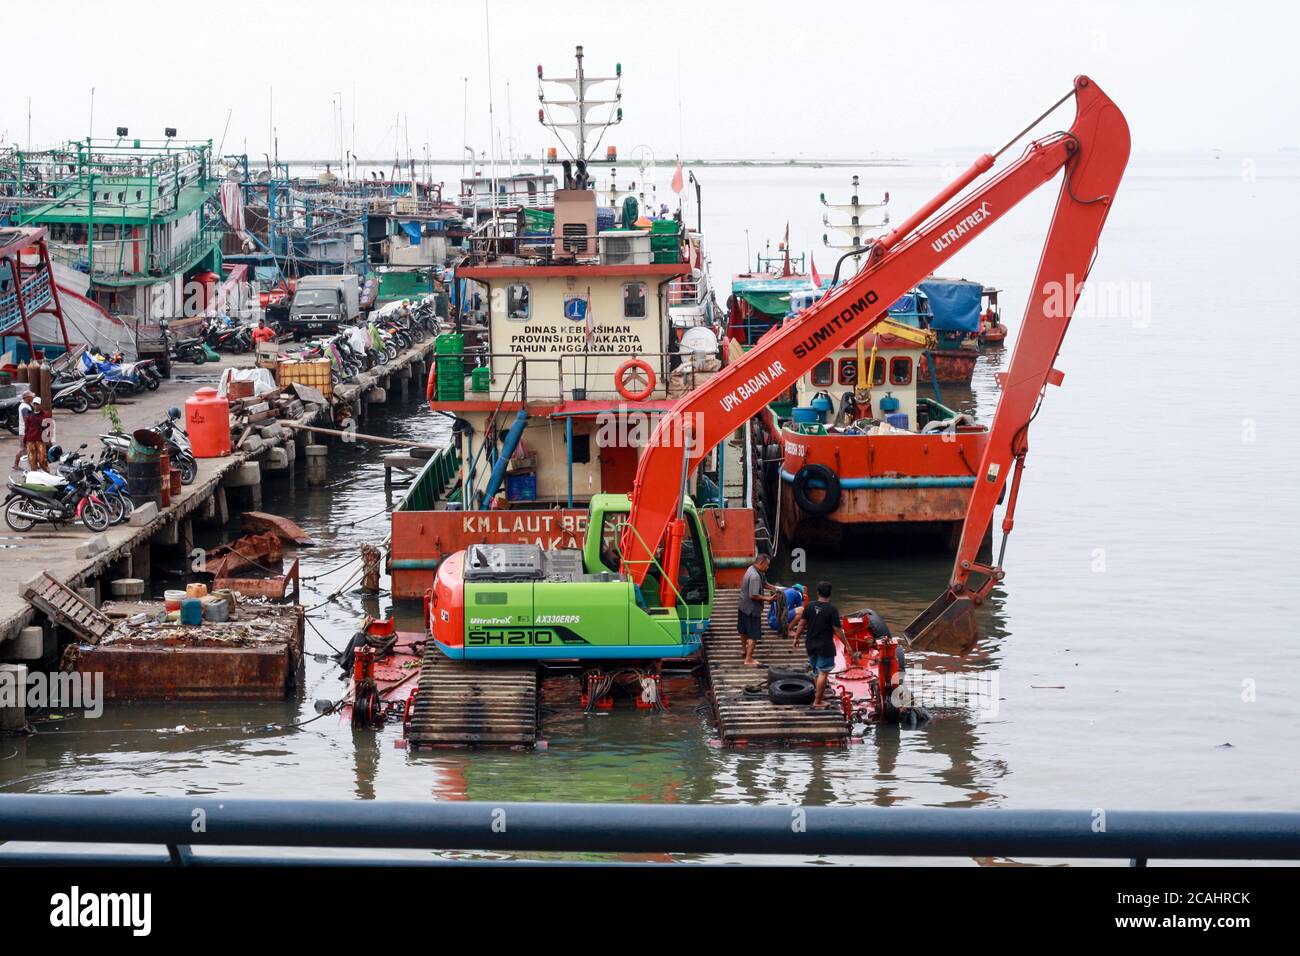 Jakarta, Indonesia - April 21, 2019: An excavator operated to clean up garbage in Muara Angke Port, North Jakarta. Stock Photo